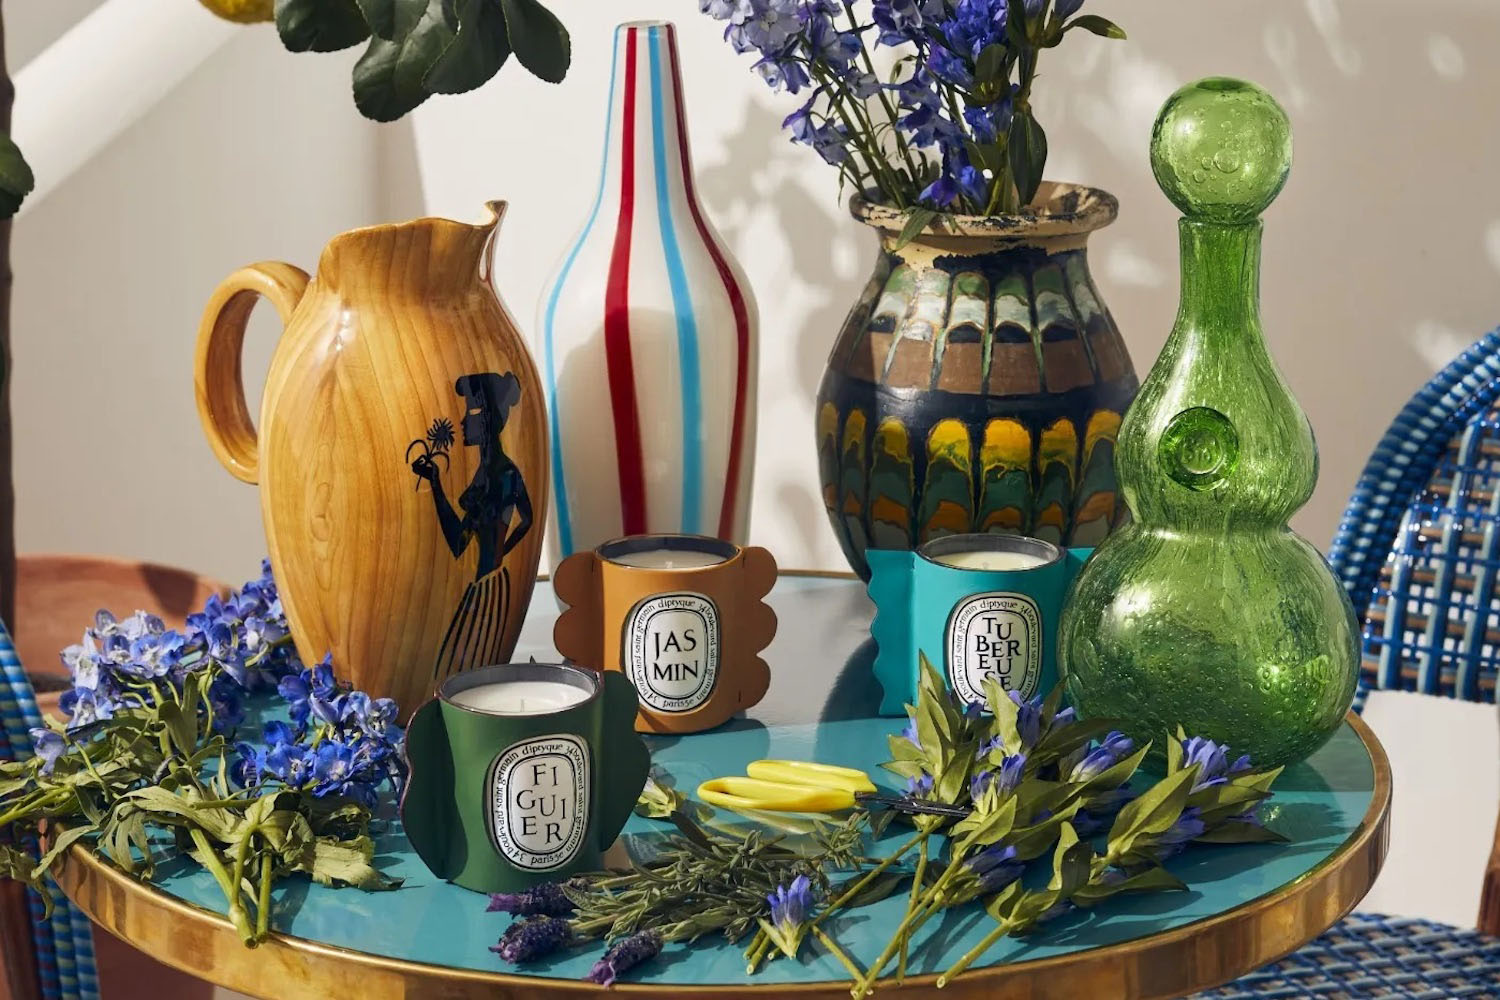 A table full of artesian goods from Diptyque